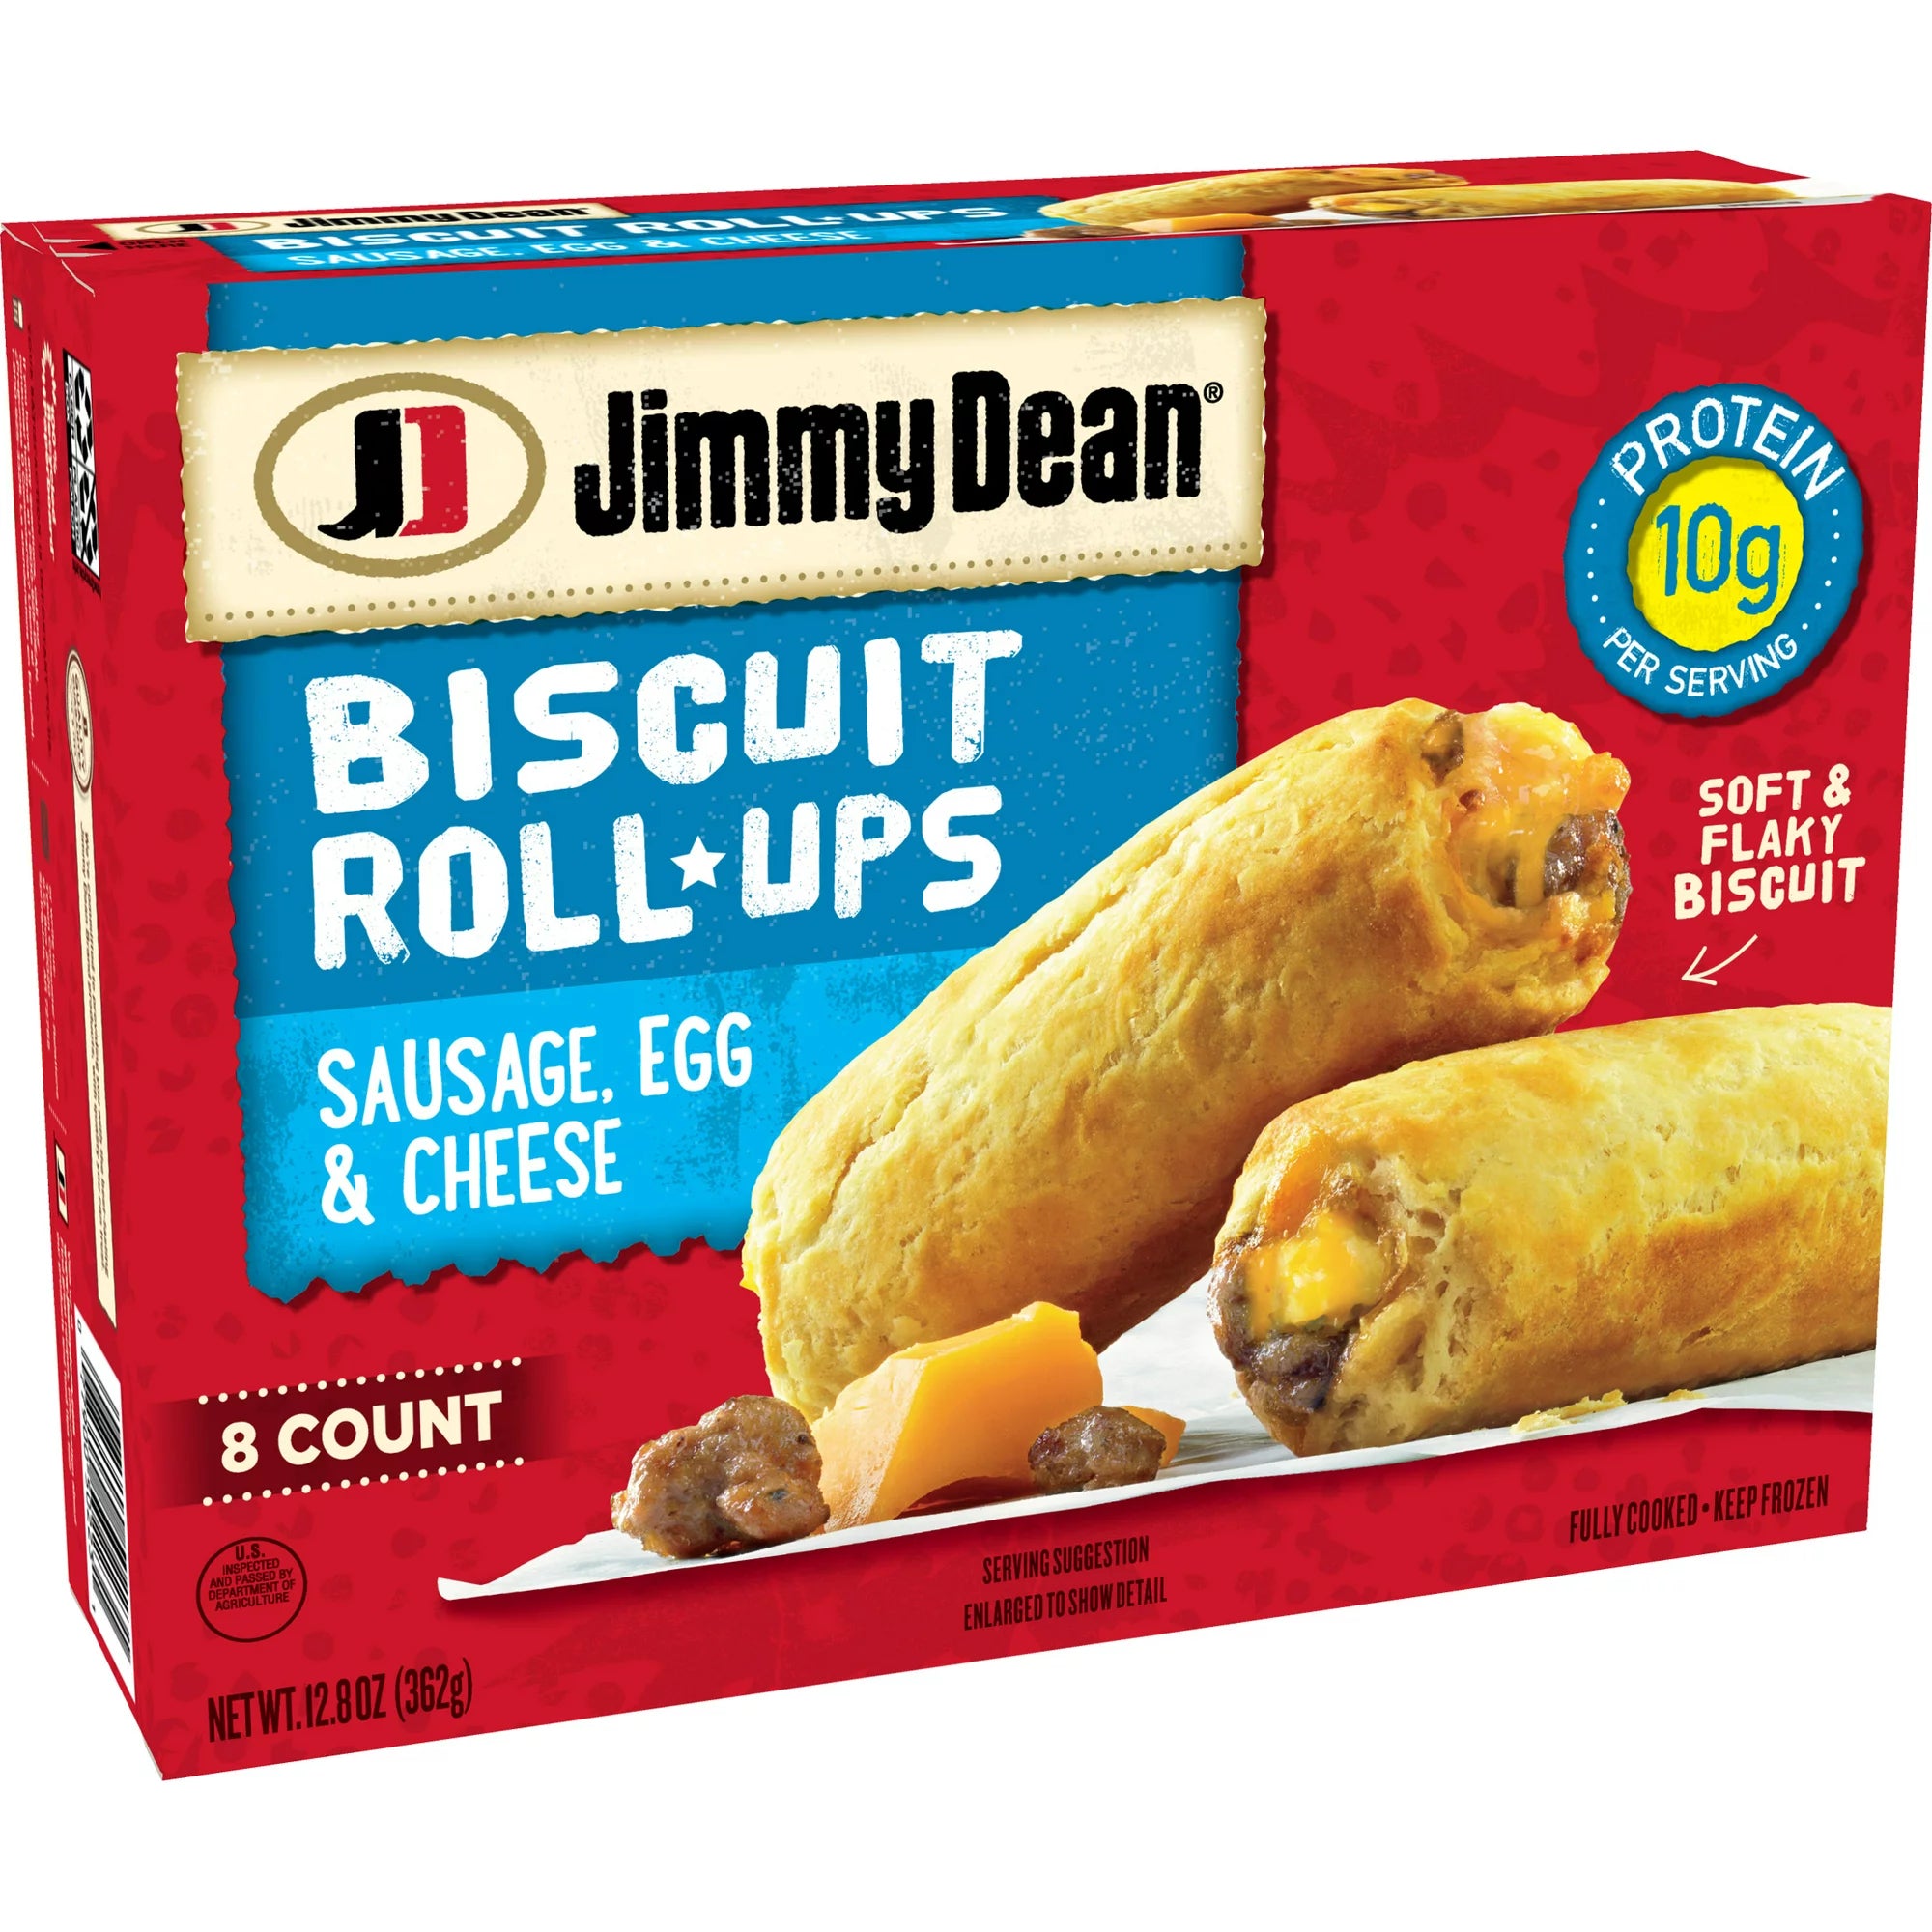 Jimmy Dean Sausage, Egg & Cheese Biscuit Rollups, 12.8 oz, 8 Ct -- Pack of 3